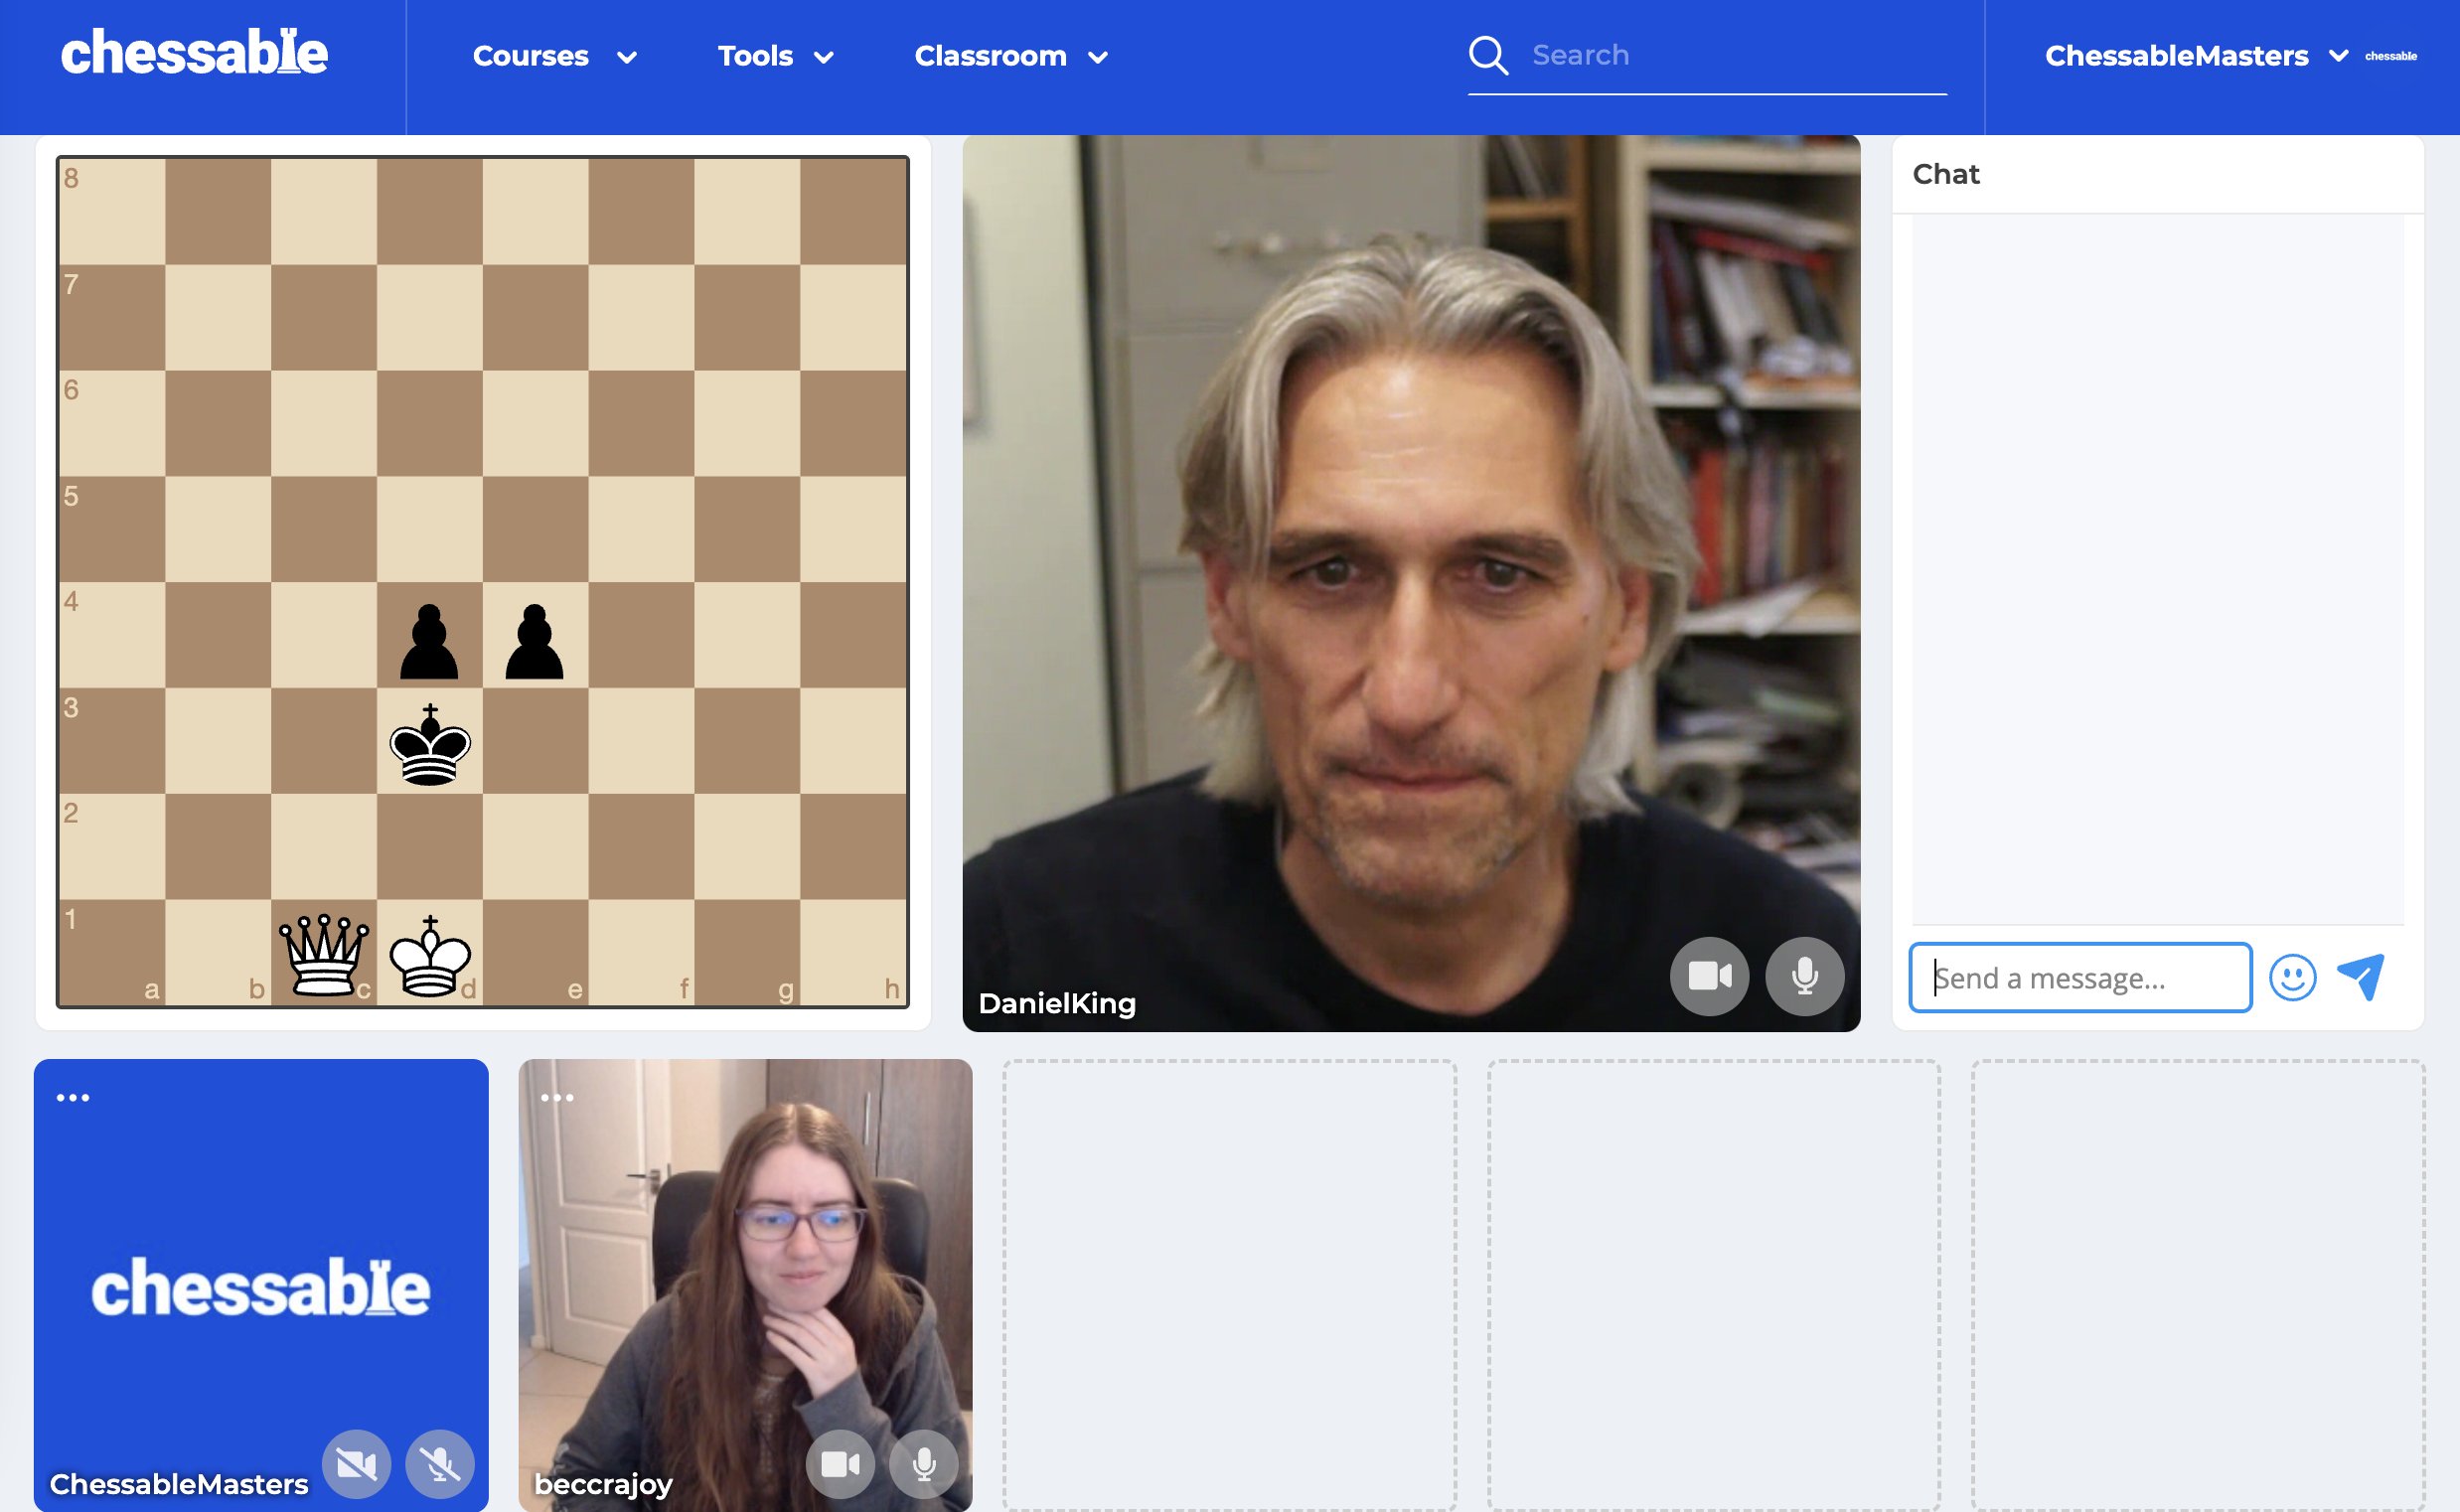 Chessable  #1 site for chess improvement (@chessable) • Instagram photos  and videos